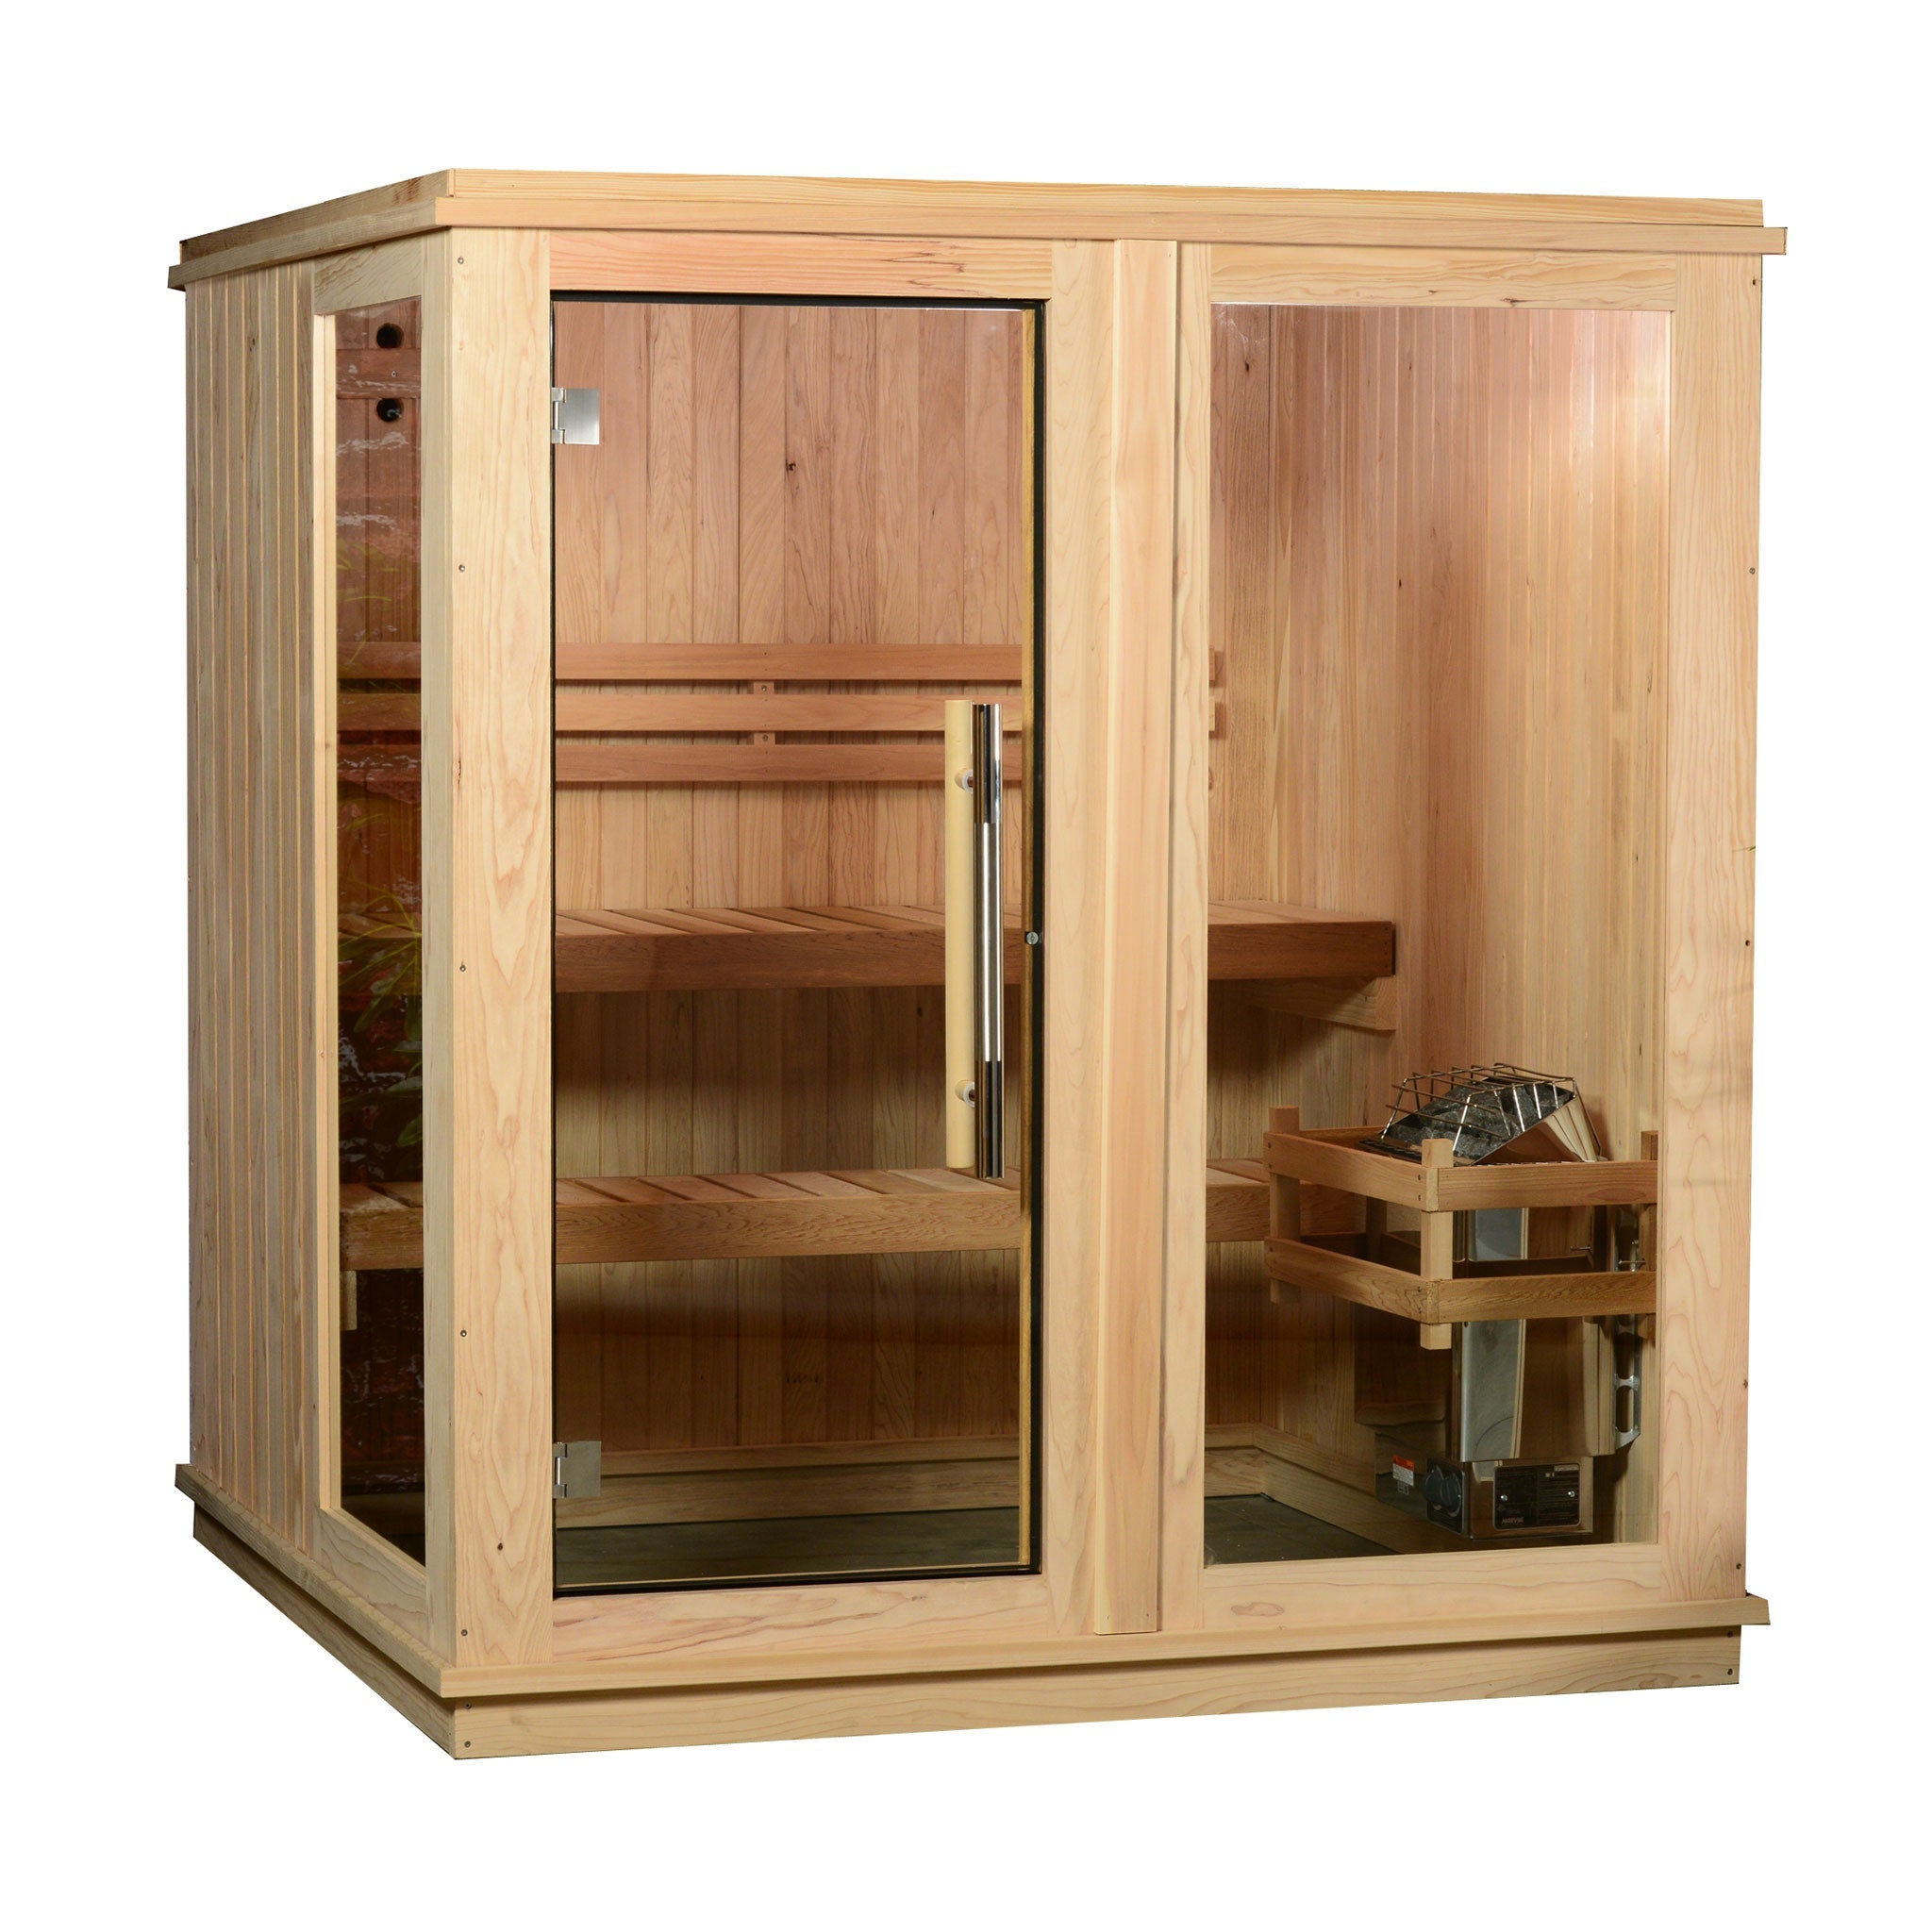 Grayson 4 Person Indoor Sauna with Premium Cedar Wood and Advanced Heating System